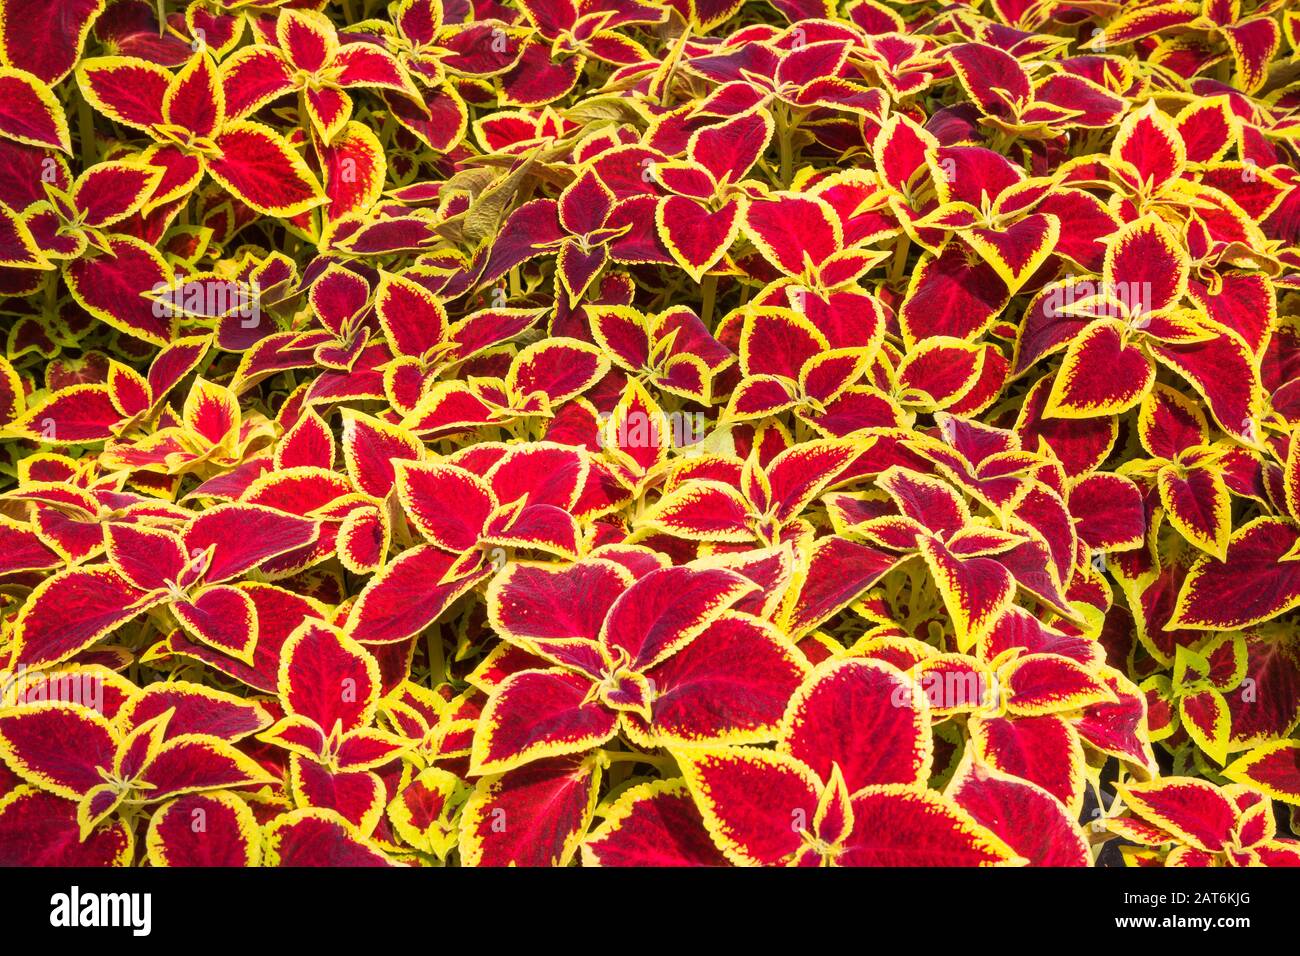 Burgundy and yellowish Solenostemon - Coleus plants being grown organically in containers inside a greenhouse. Stock Photo